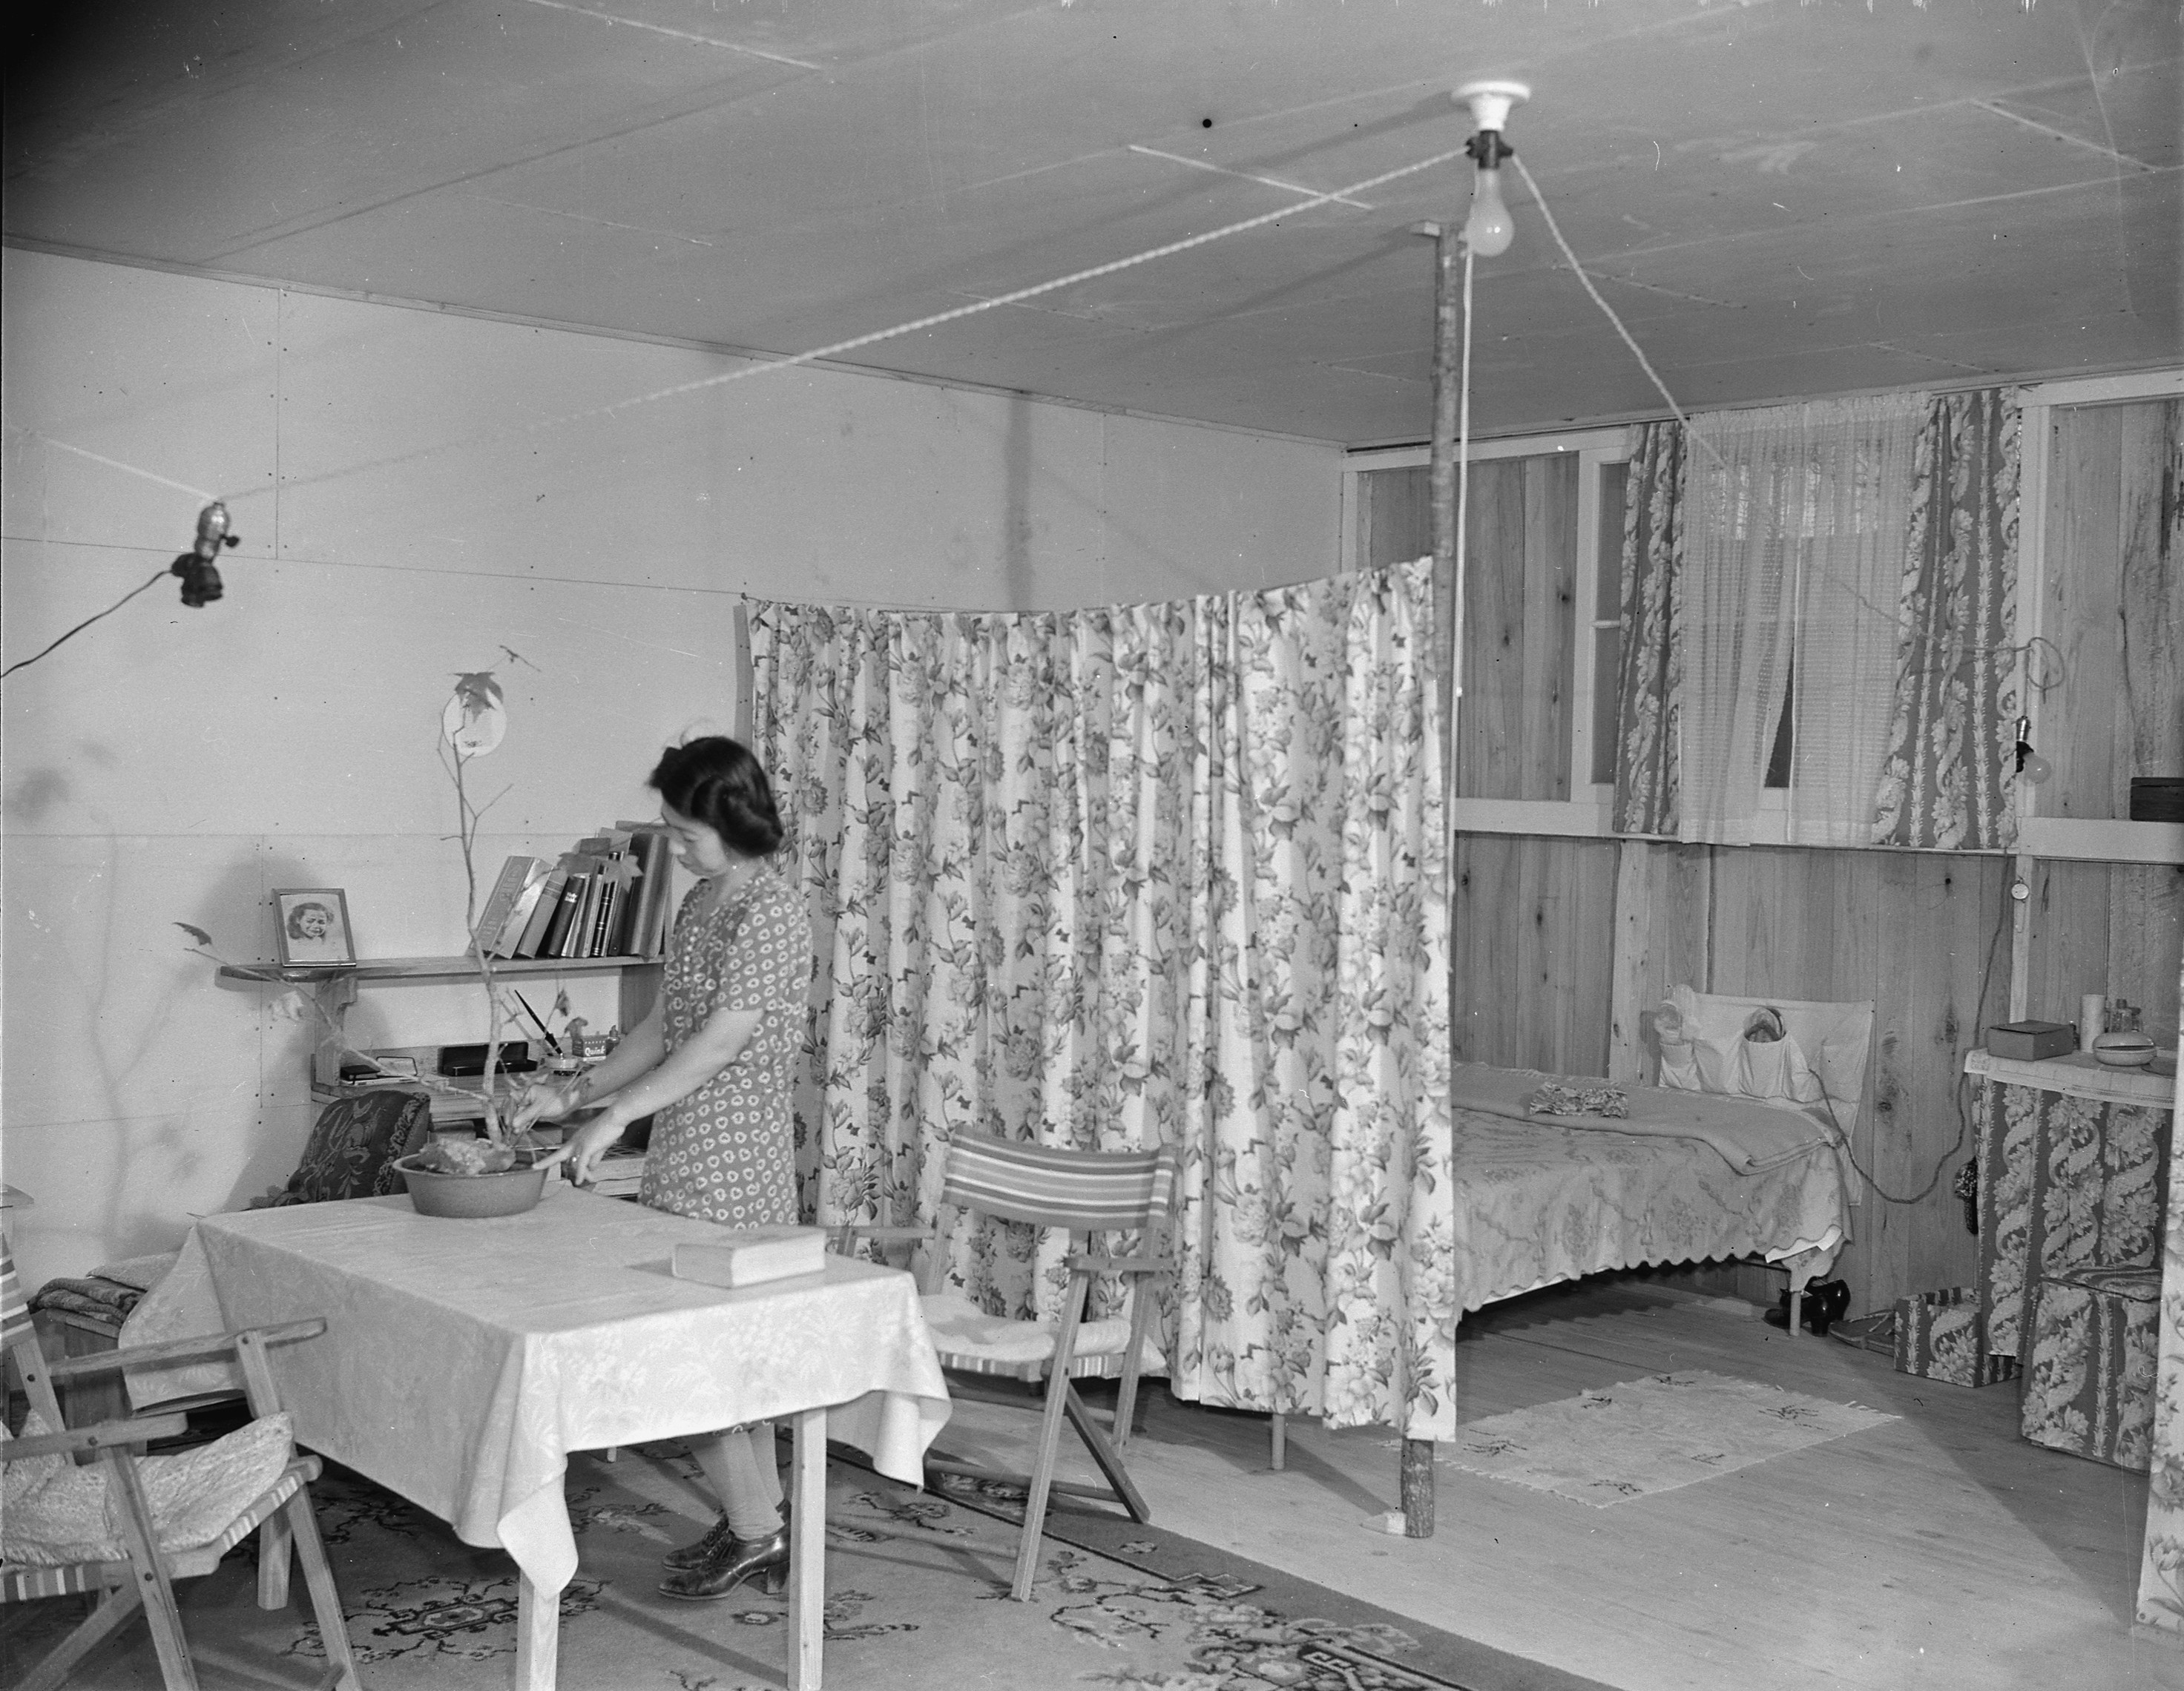 View of the interior of a typical barracks home at Jerome War Relocation Center, Arkansas, United States, 17 Nov 1942